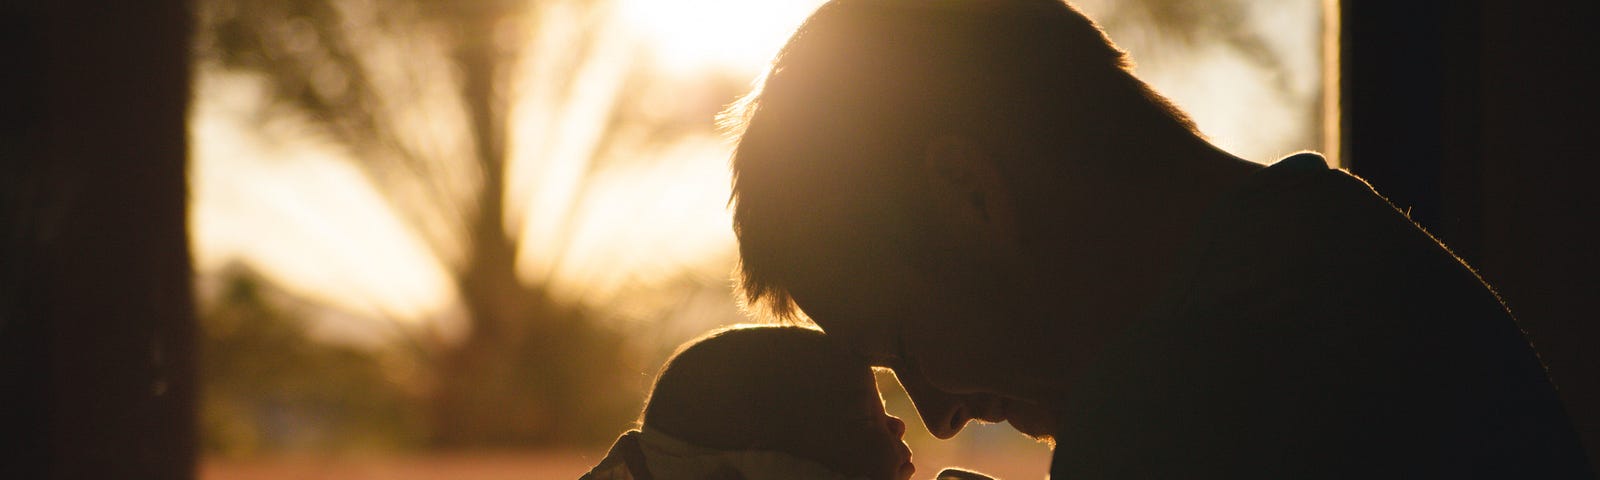 Outline of a man holding a baby close, backlit against the sun